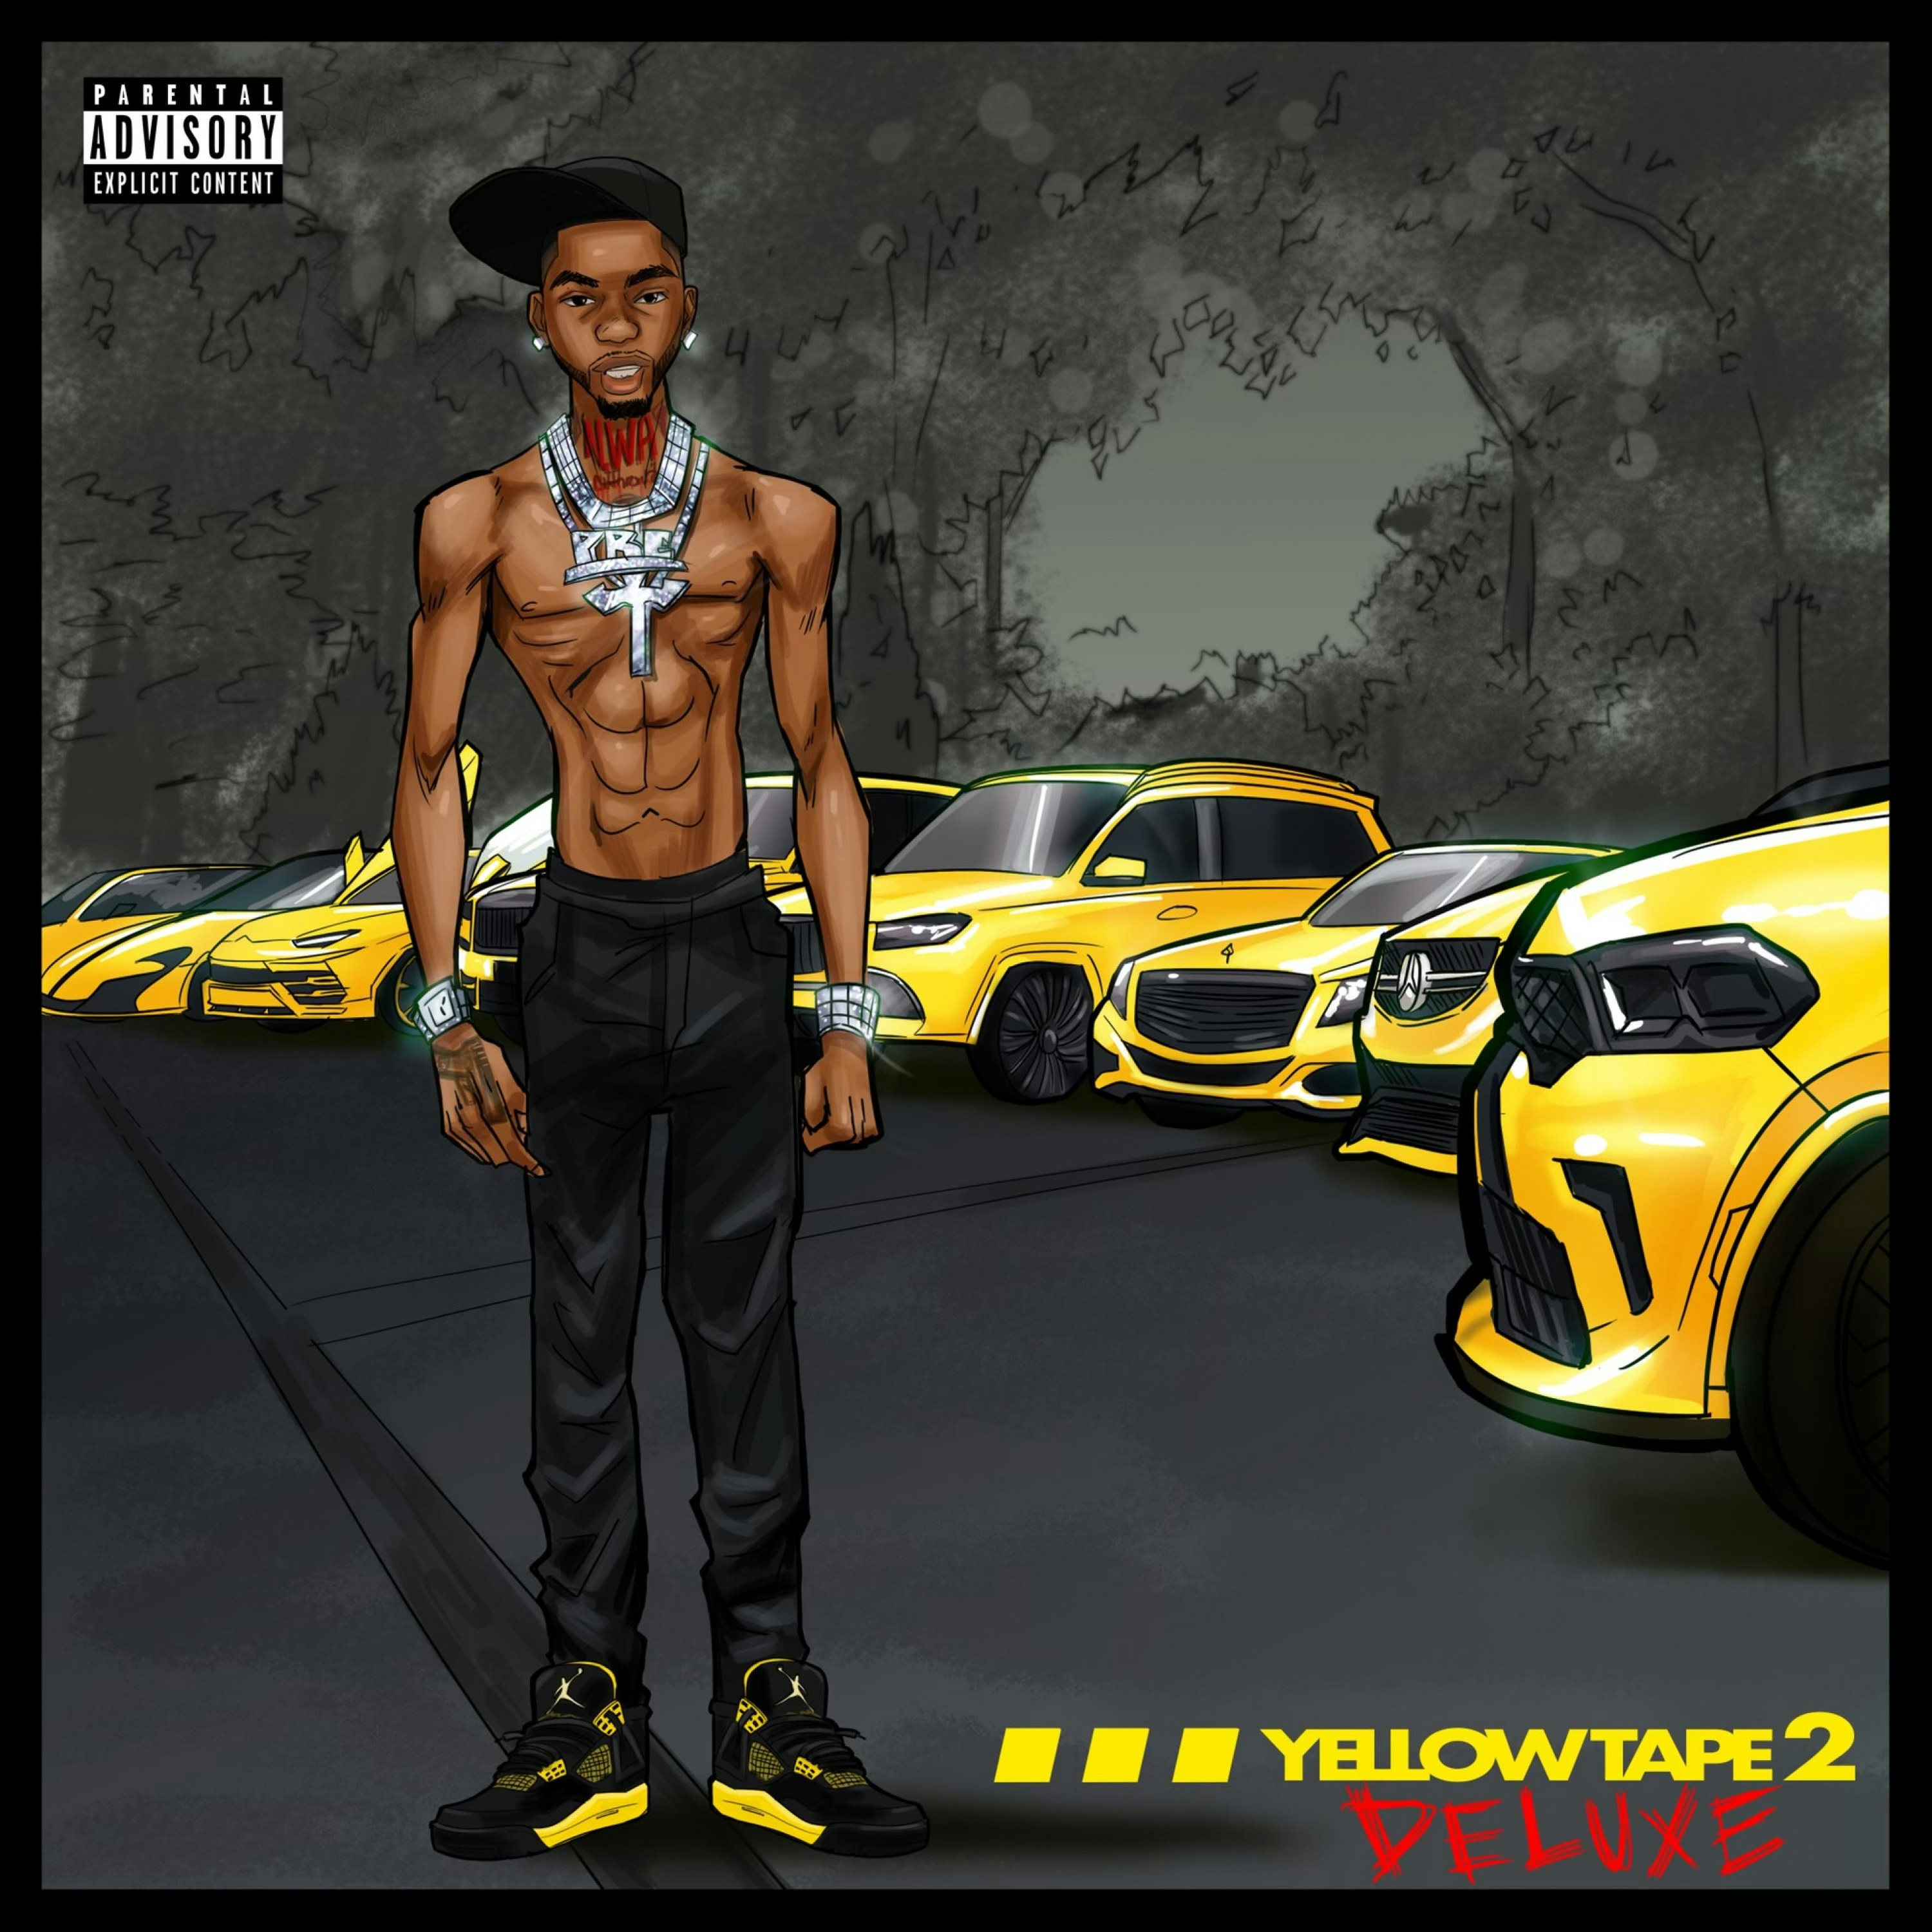 Album artwork for Yellow Tape 2 (Deluxe) by Key Glock